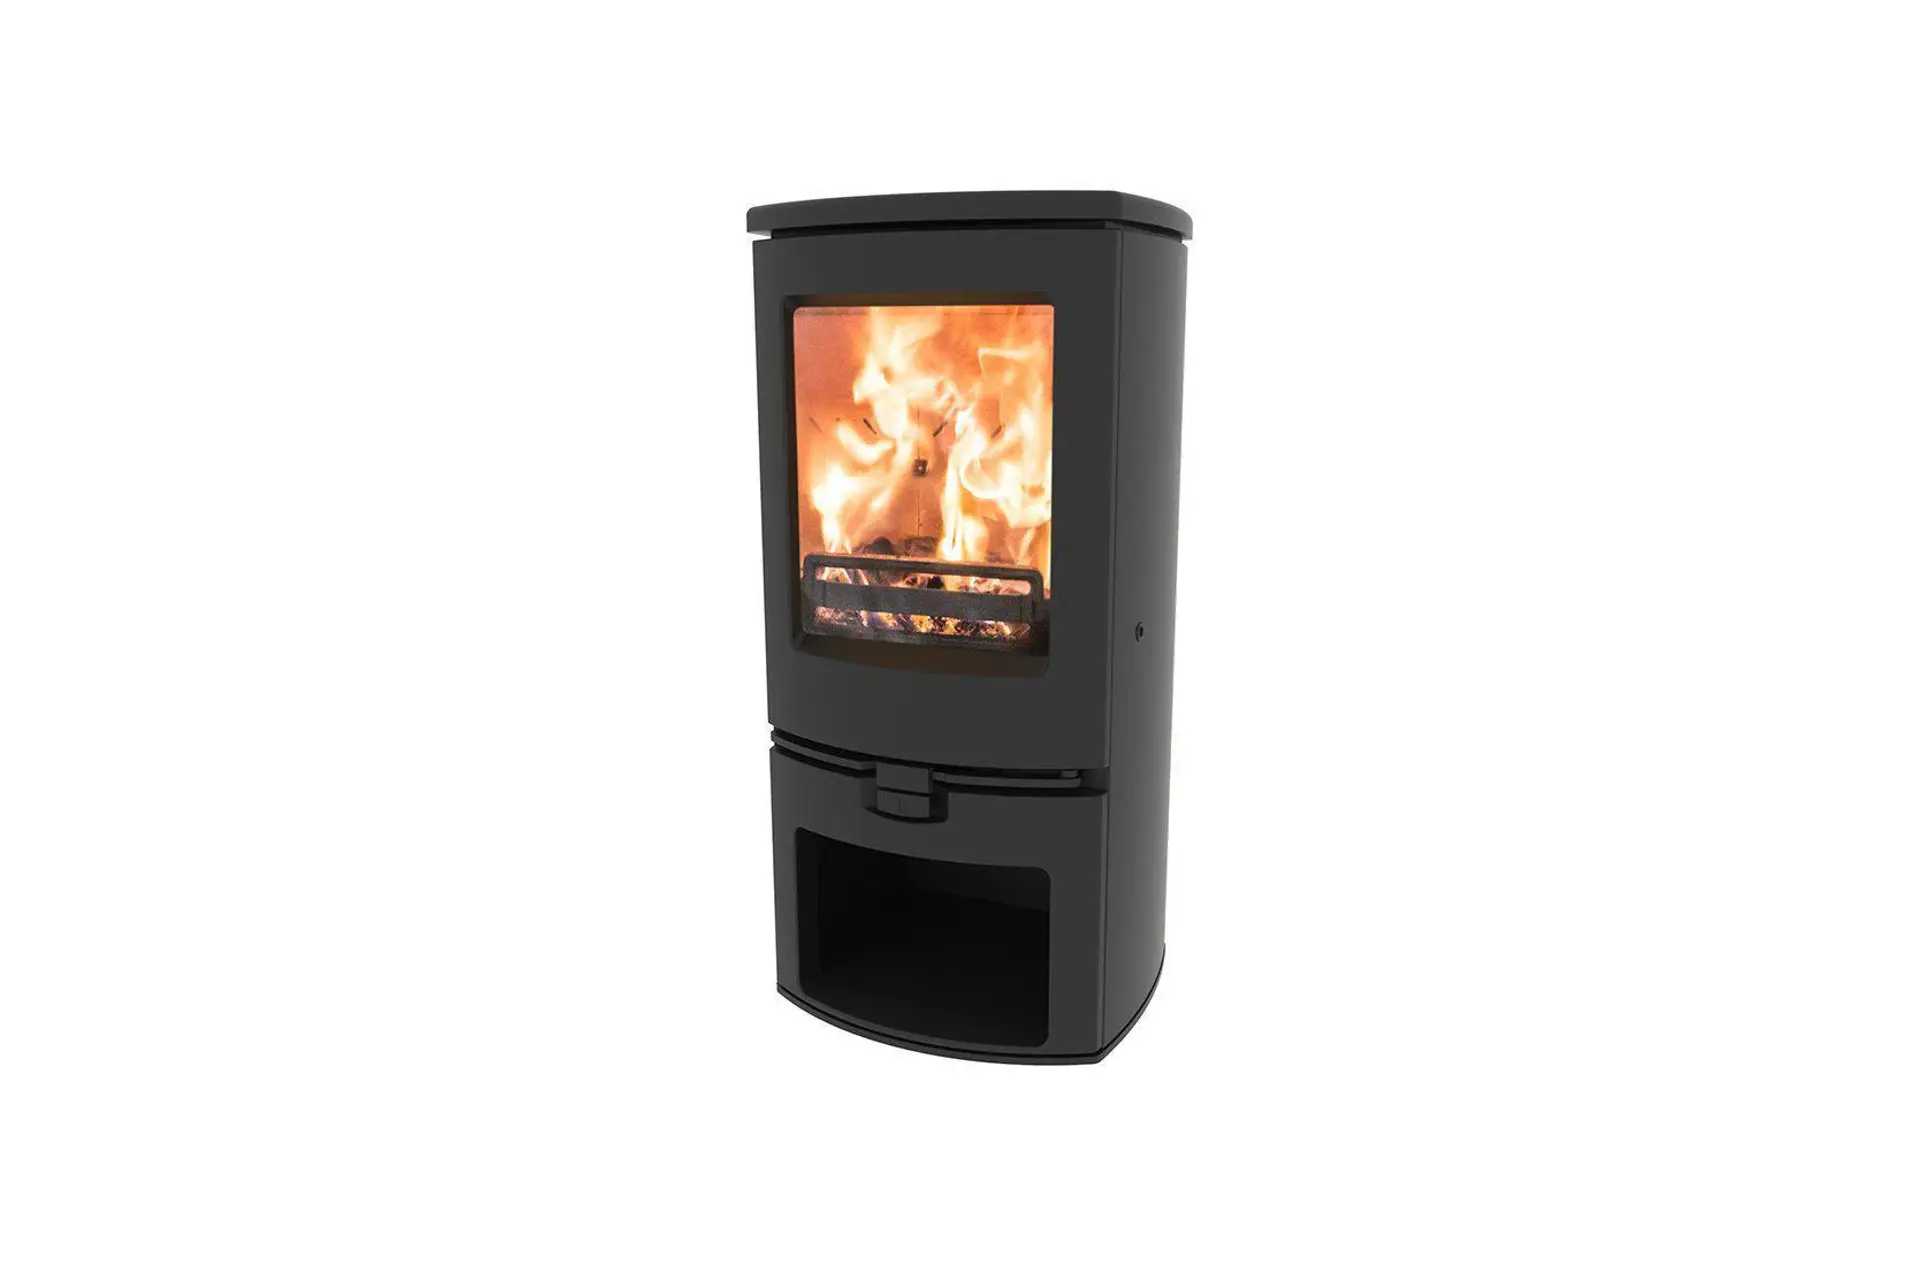 Charnwood-ARC-7-Multi-Fuel-Wood-Burning-Stove-Charnwood-Stoves-2_a7db1ad6-4dd5-4dc6-b43f-8bb70a8d6491_5000x.png